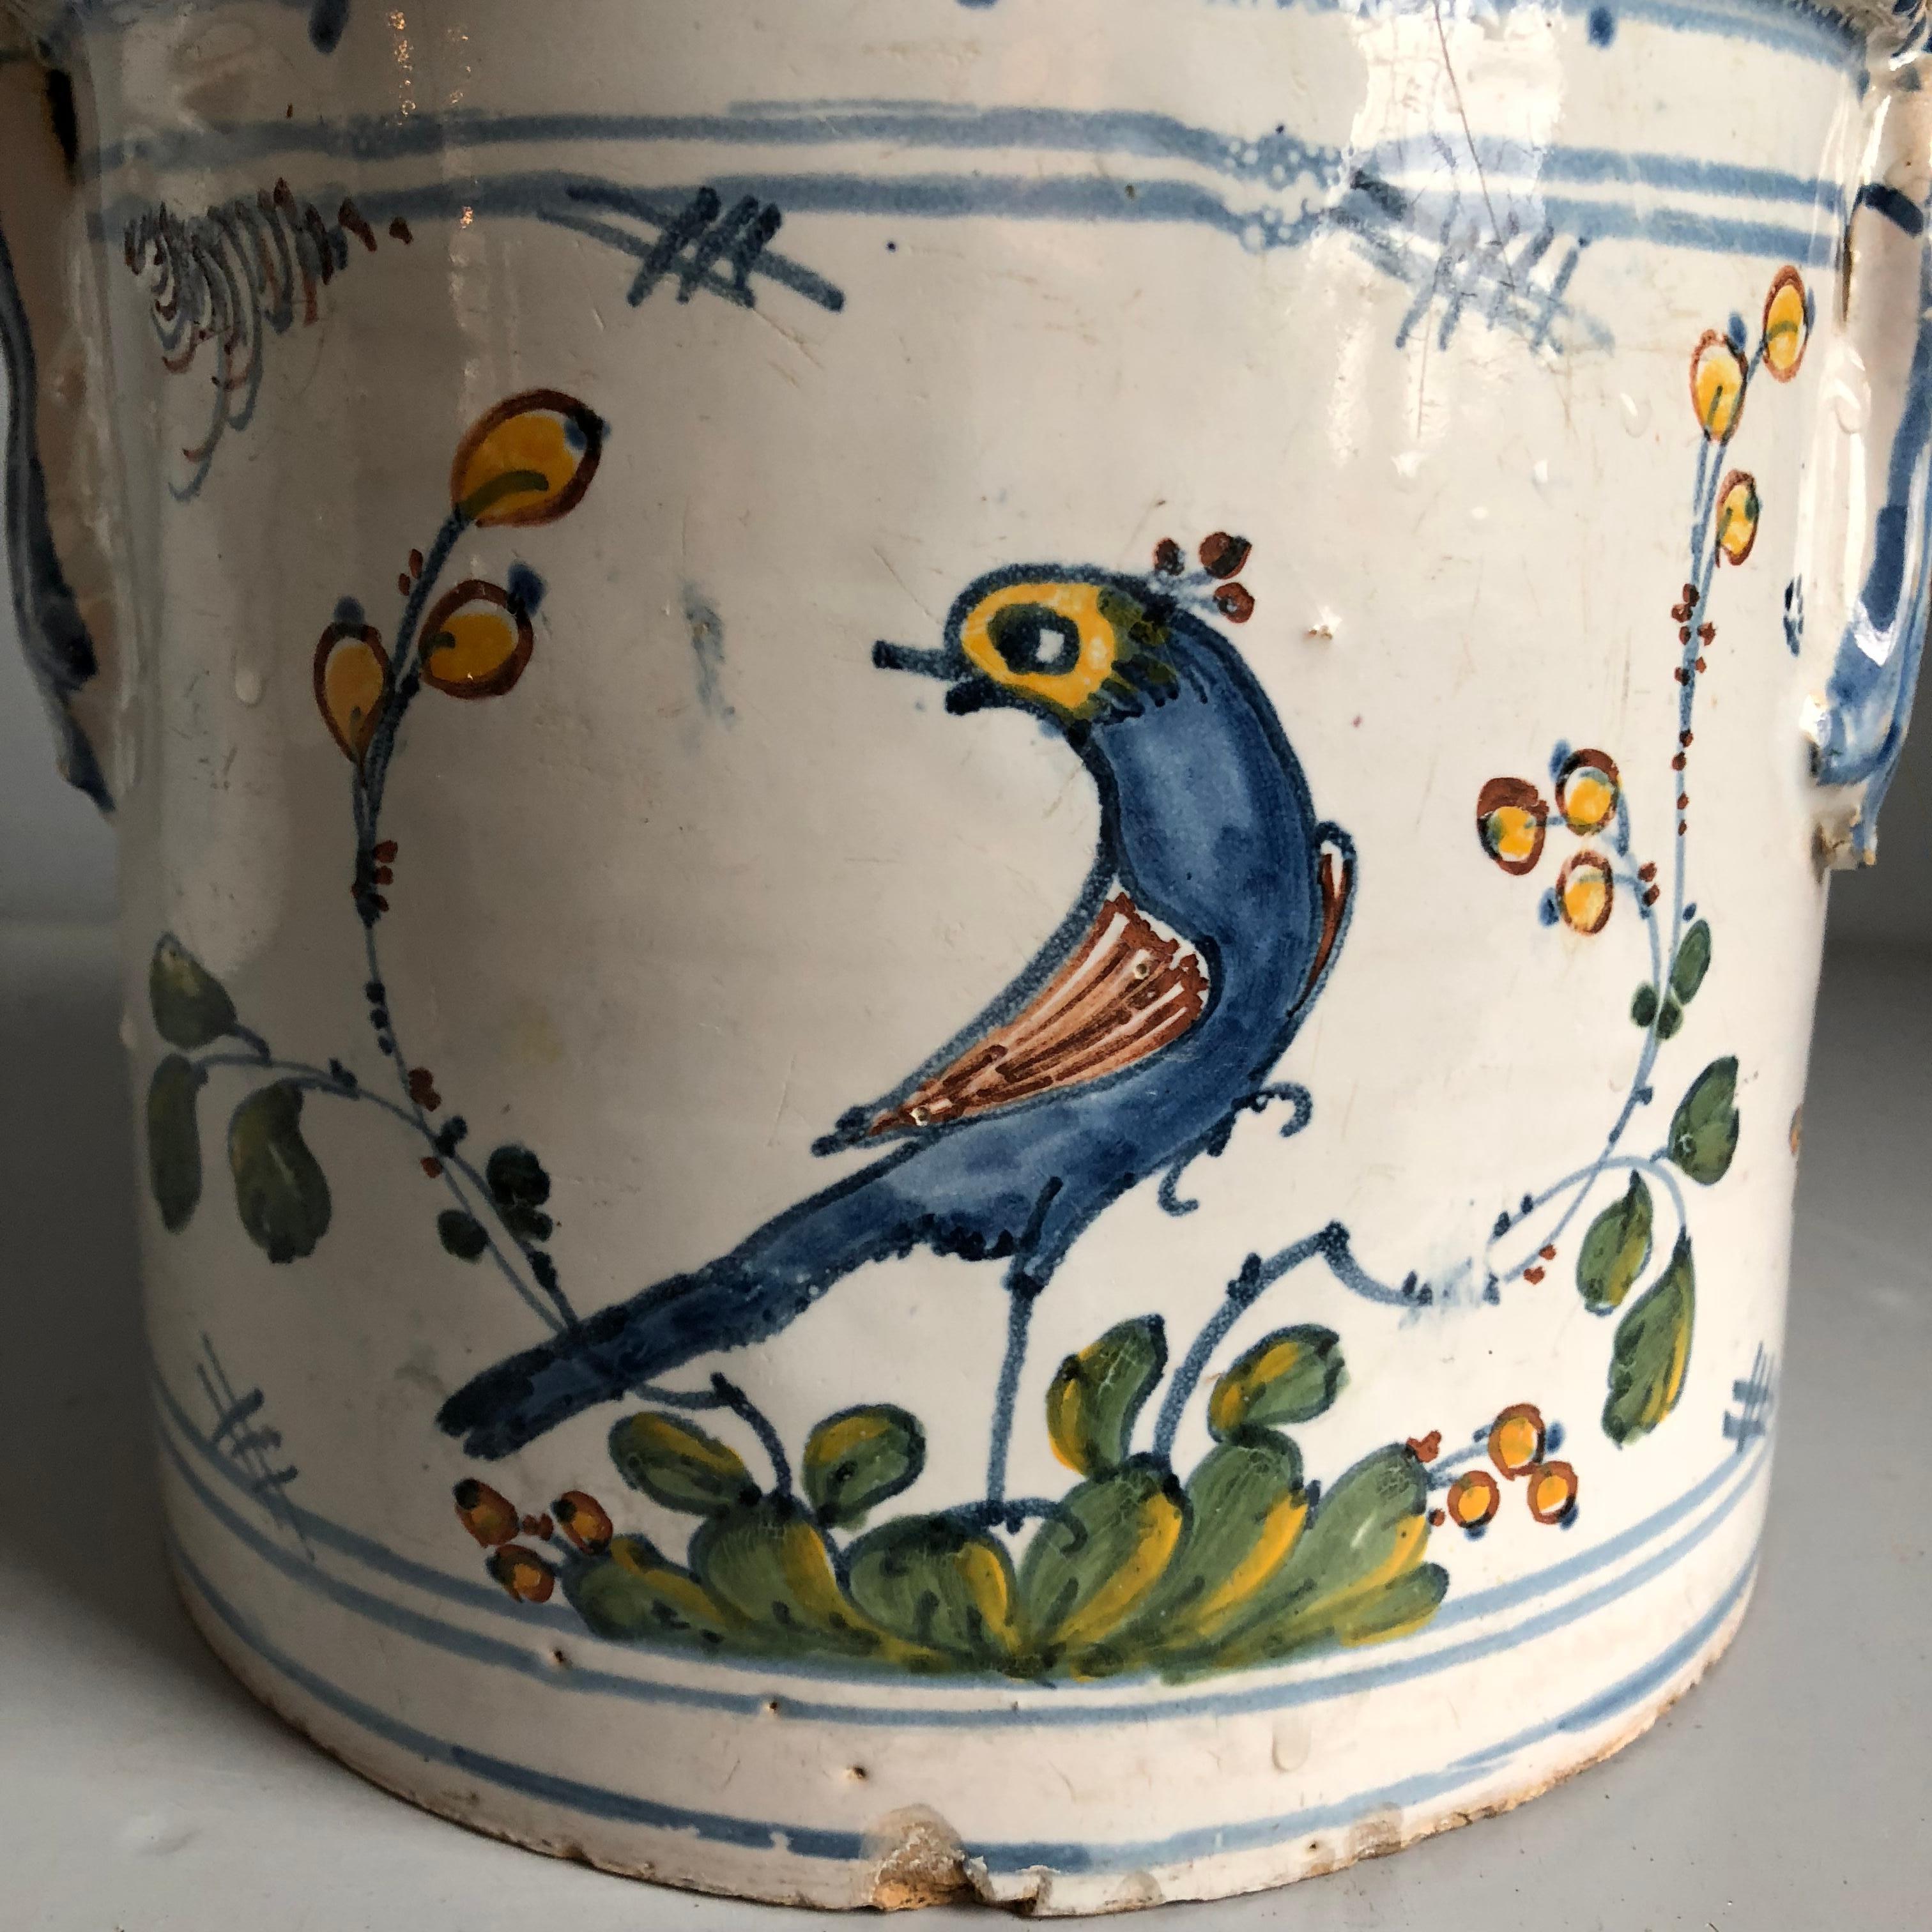 French Provincial 18th Century Faience Cache Pot, Nevers